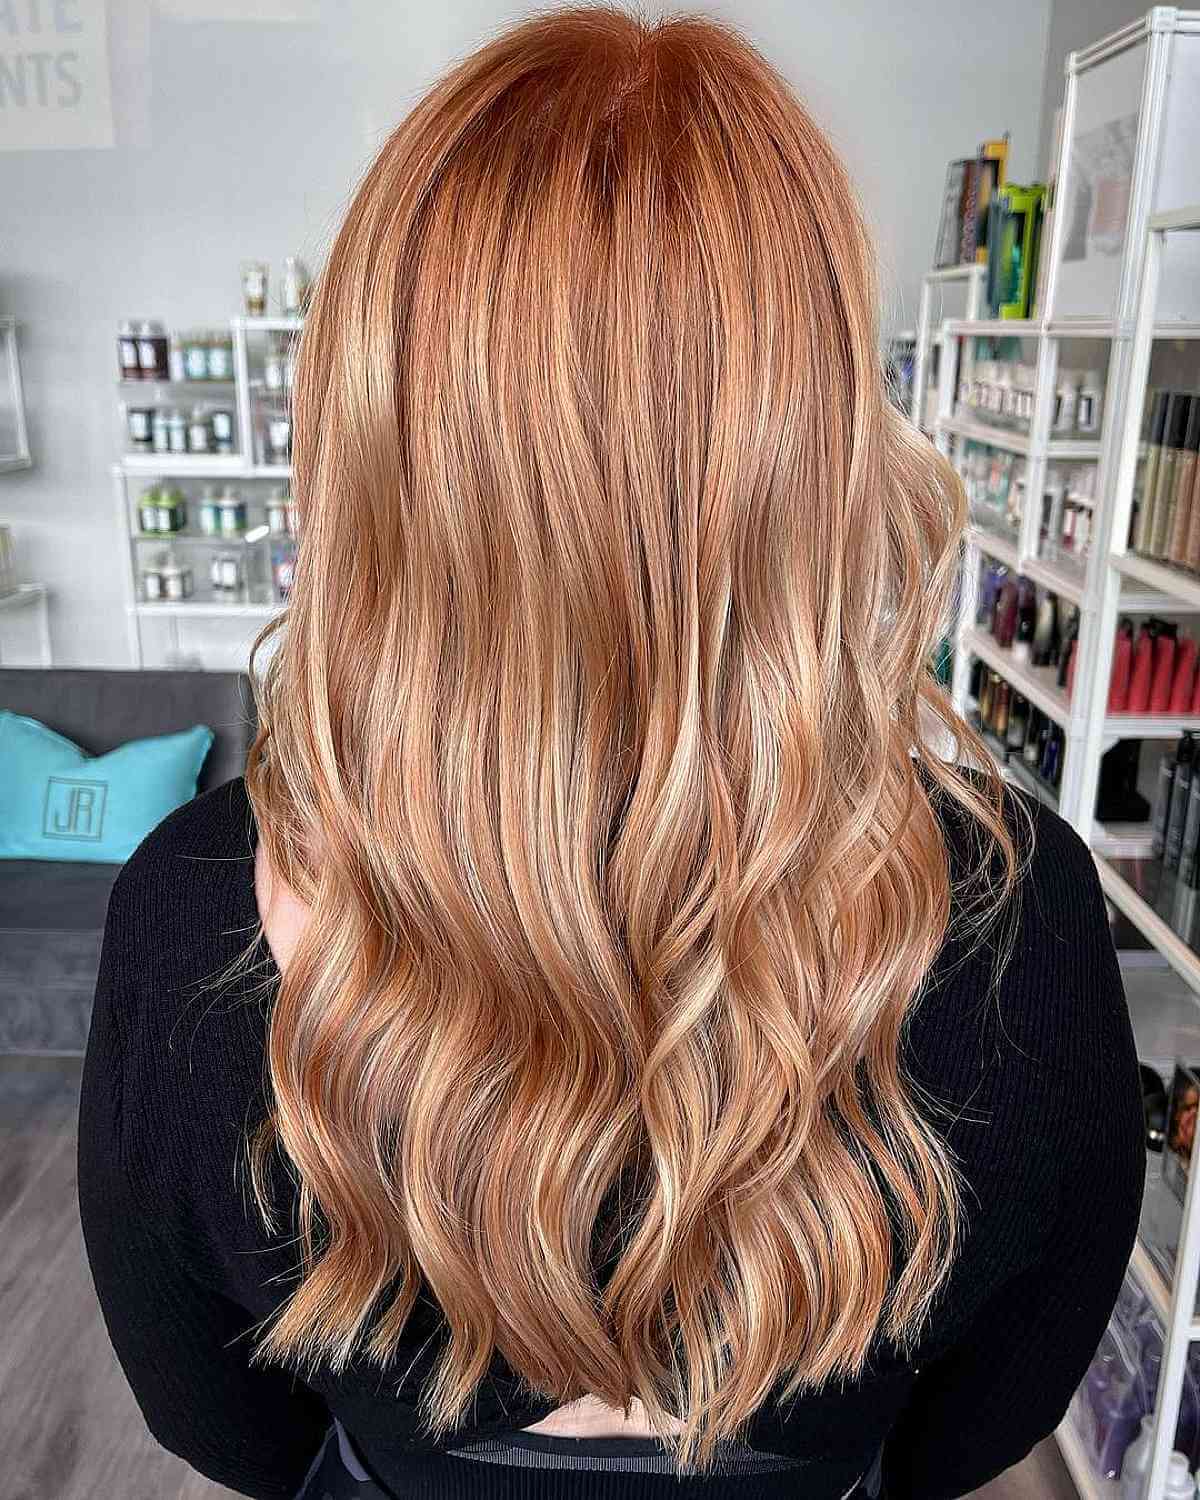 25 Strawberry Blonde Hair Colours You Need to See | All Things Hair